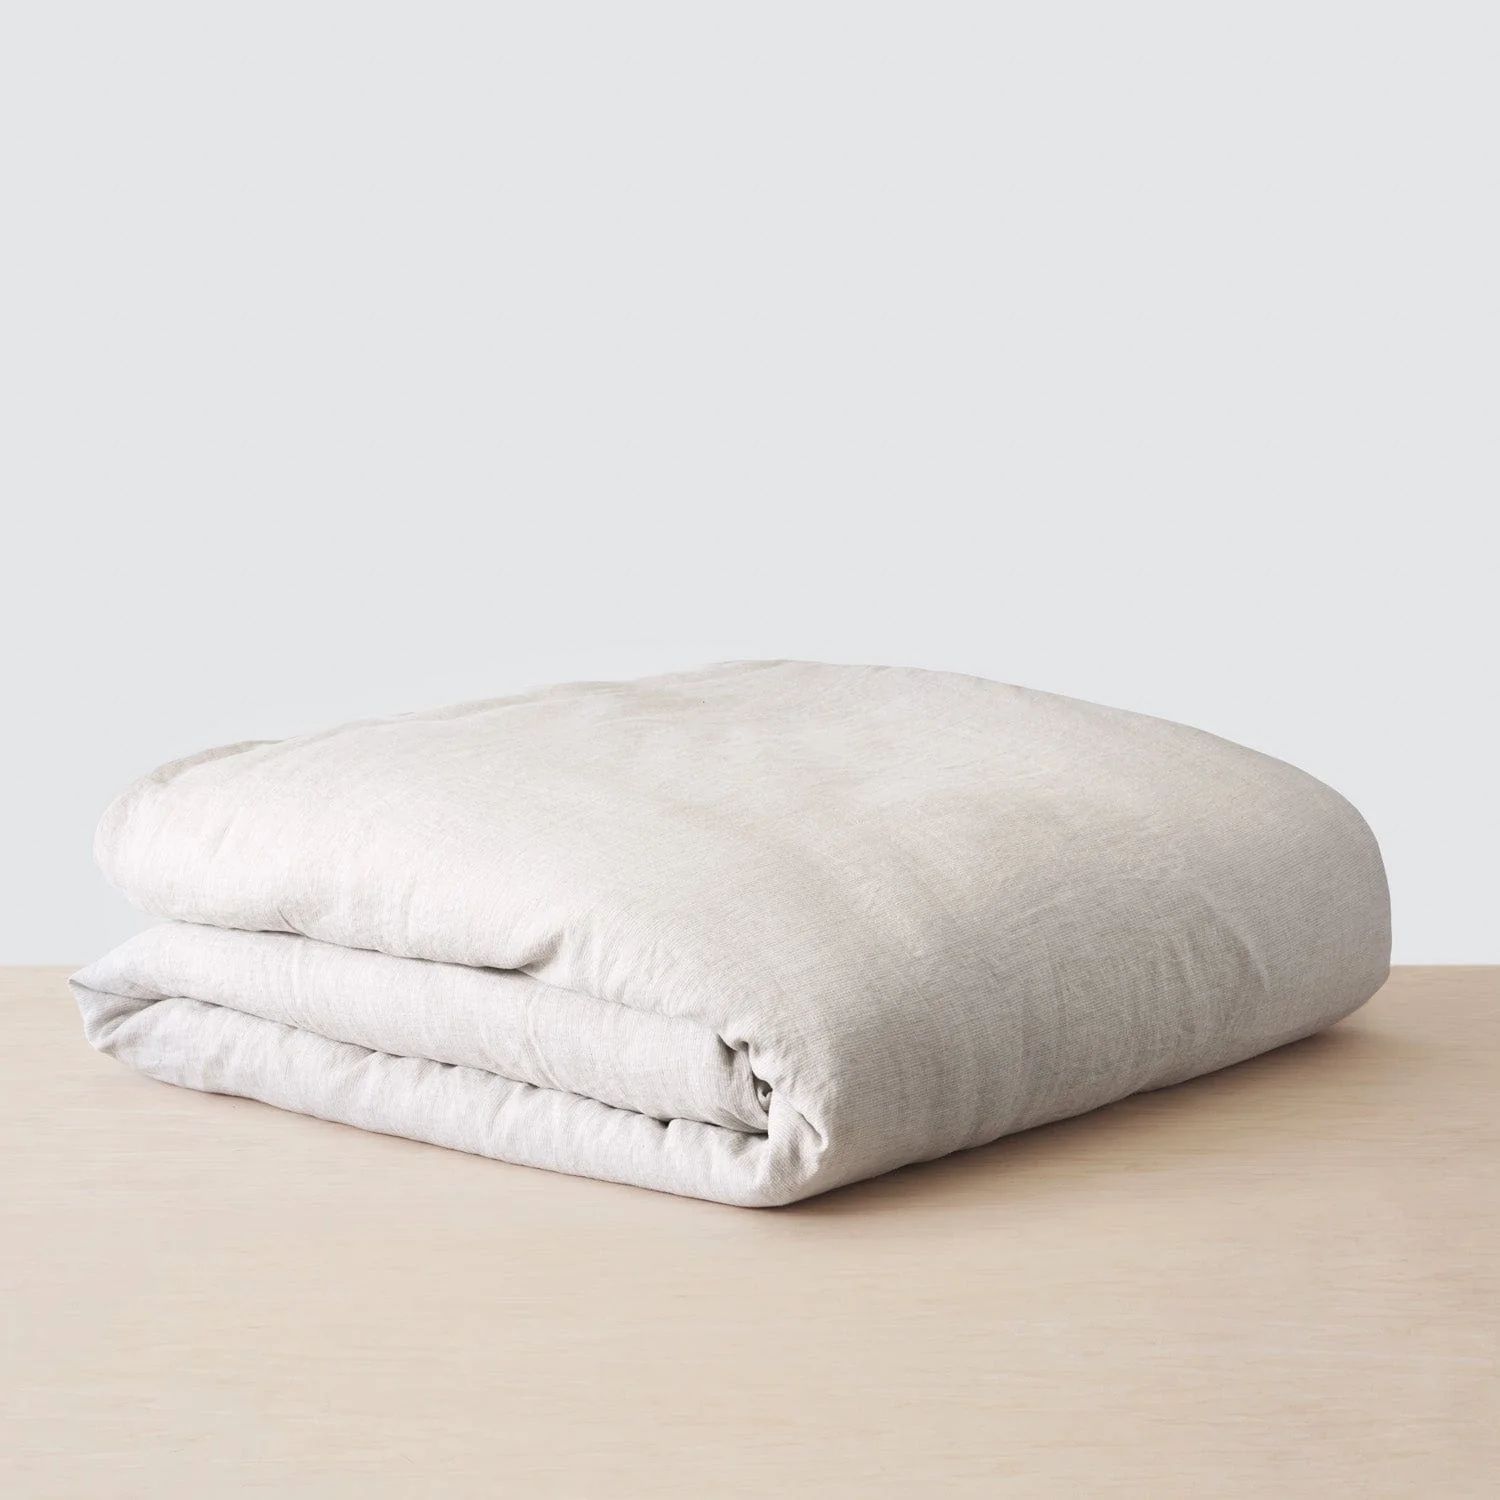 Stonewashed Linen Bed Bundle - Earth Series   – The Citizenry | The Citizenry